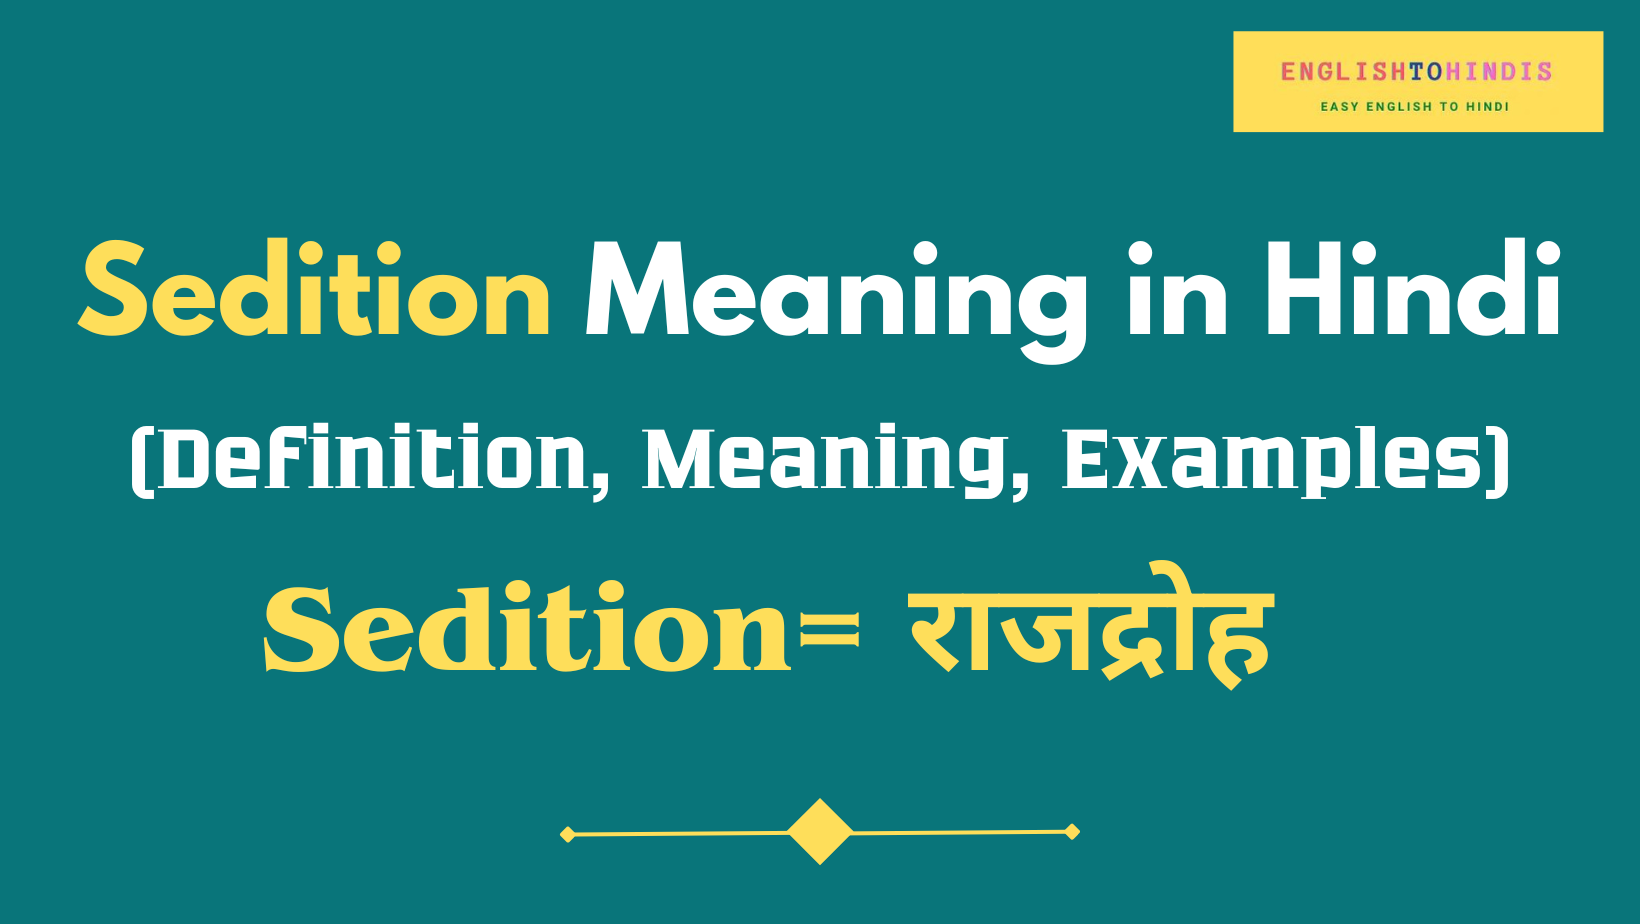 Sedition Meaning in Hindi